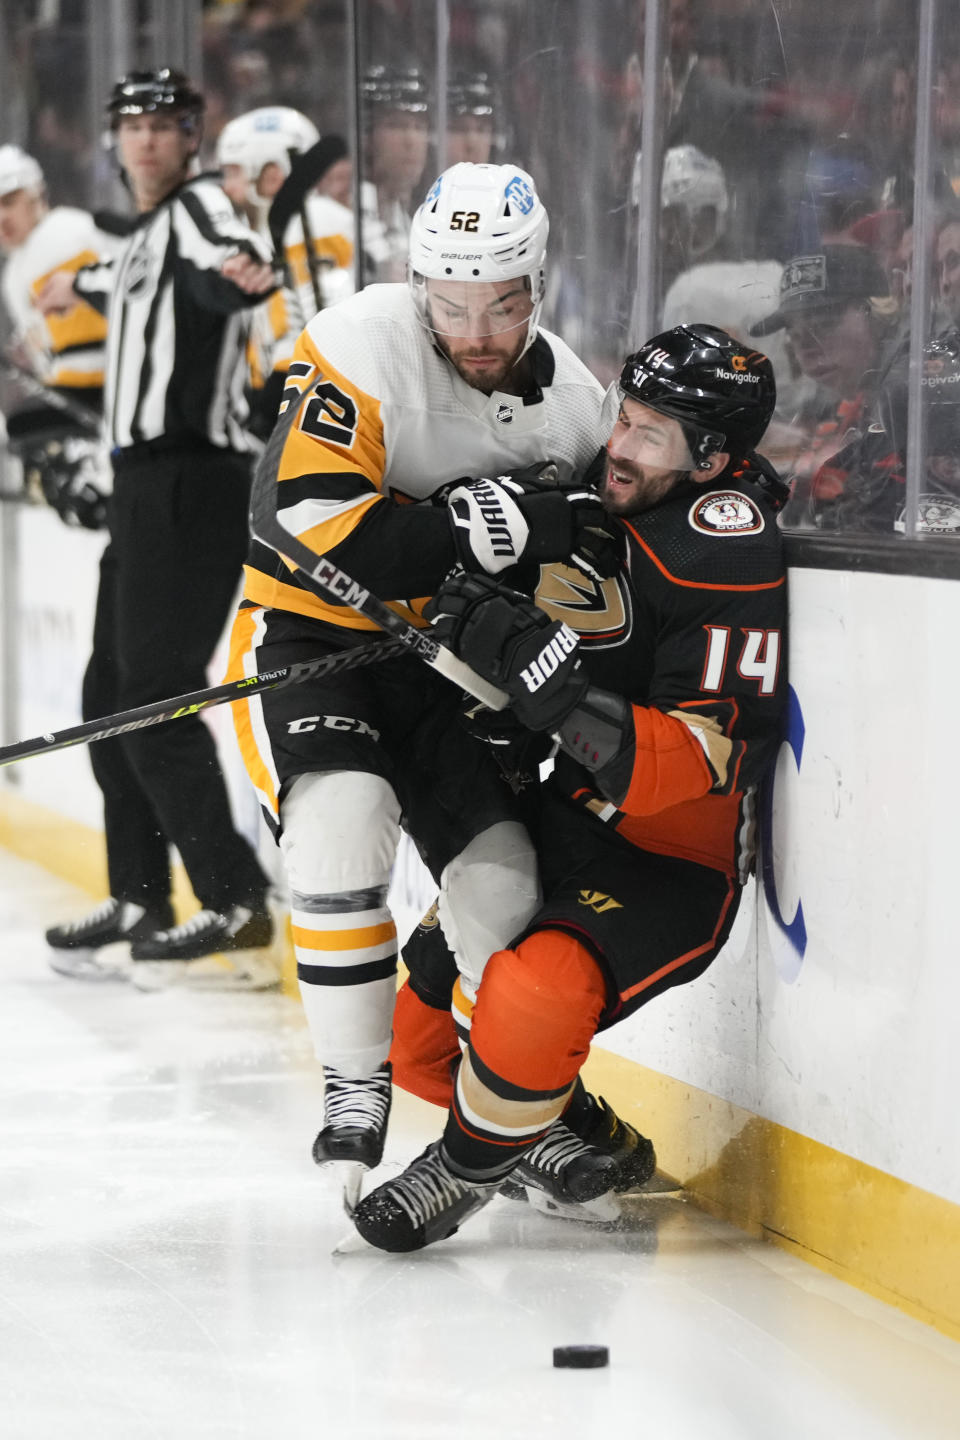 Anaheim Ducks' Adam Henrique (14) is checked by Pittsburgh Penguins' Mark Friedman (52) during the first period of an NHL hockey game Friday, Feb. 10, 2023, in Anaheim, Calif. (AP Photo/Jae C. Hong)